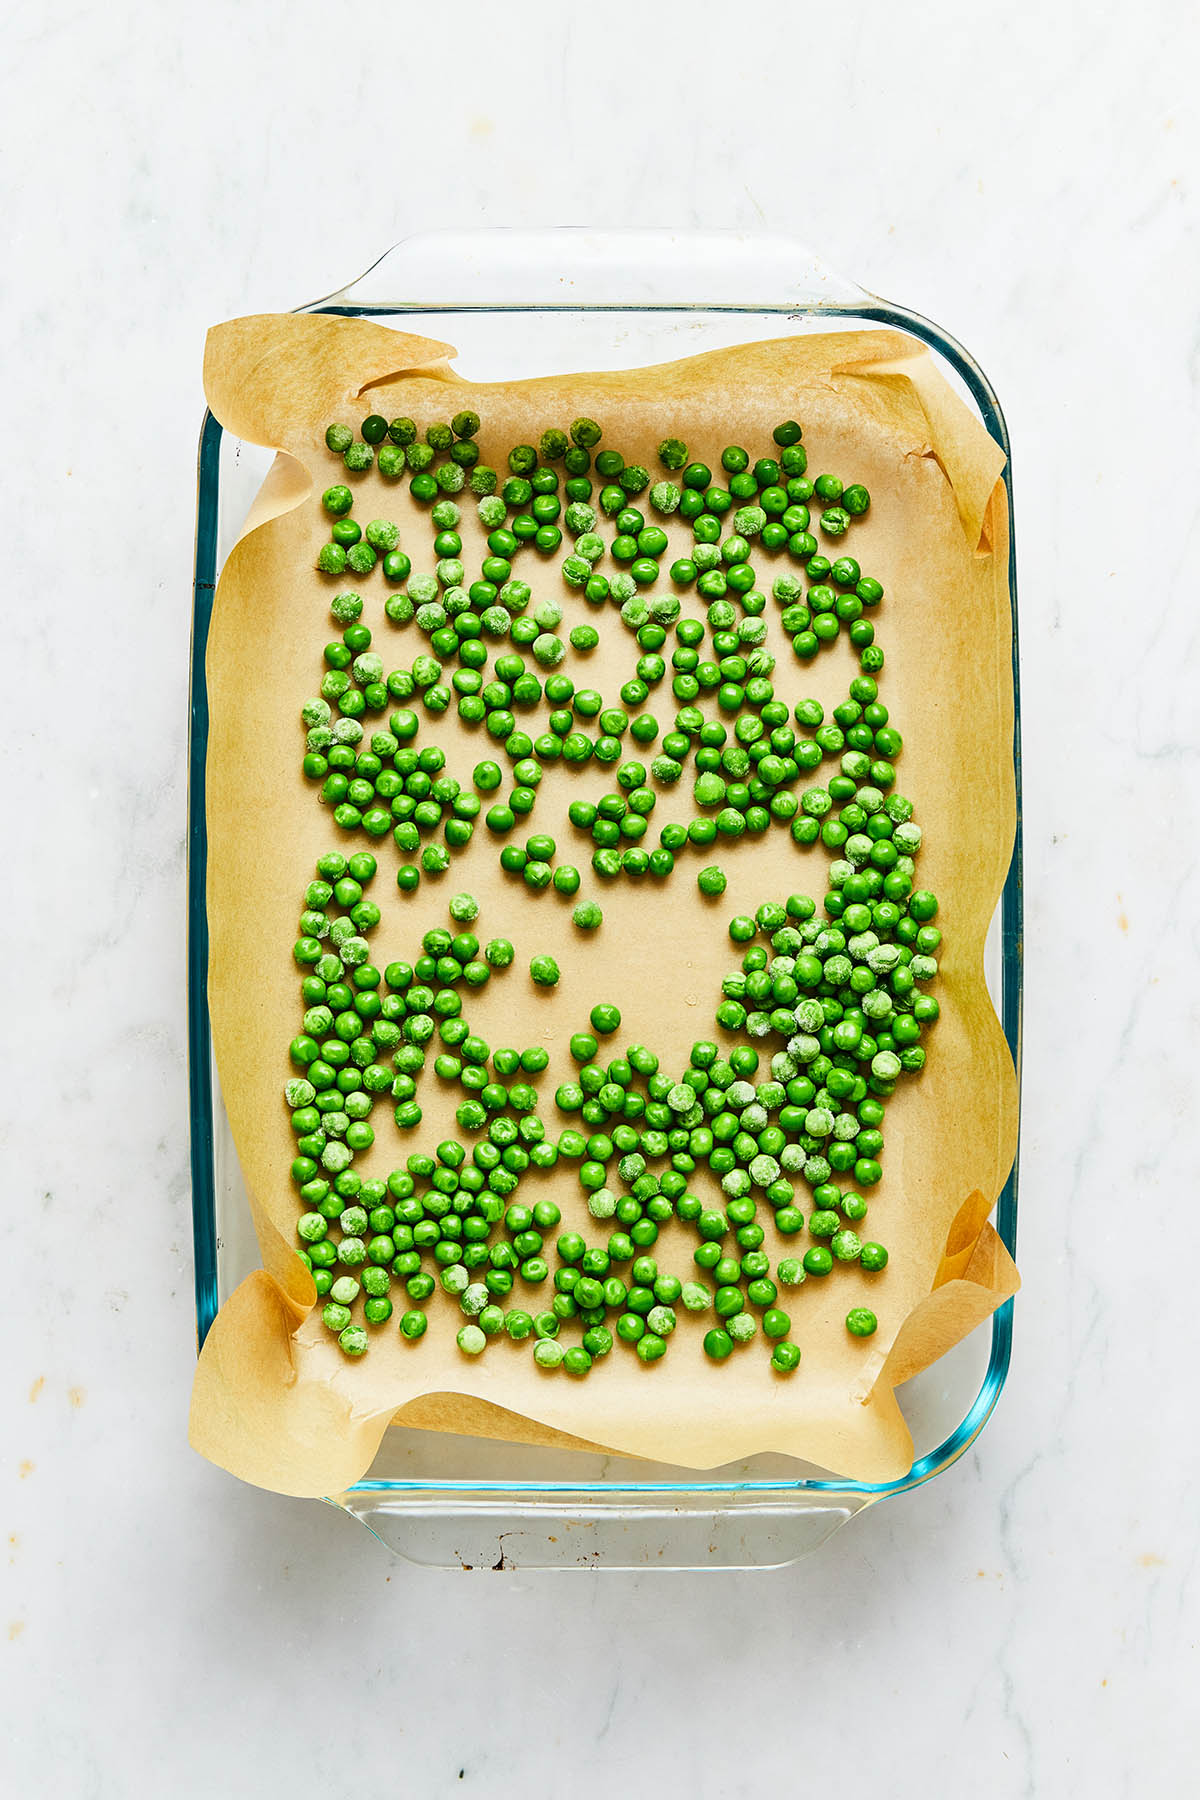 A baking dish lined with parchment paper with green peas scattered over the bottom of the dish.